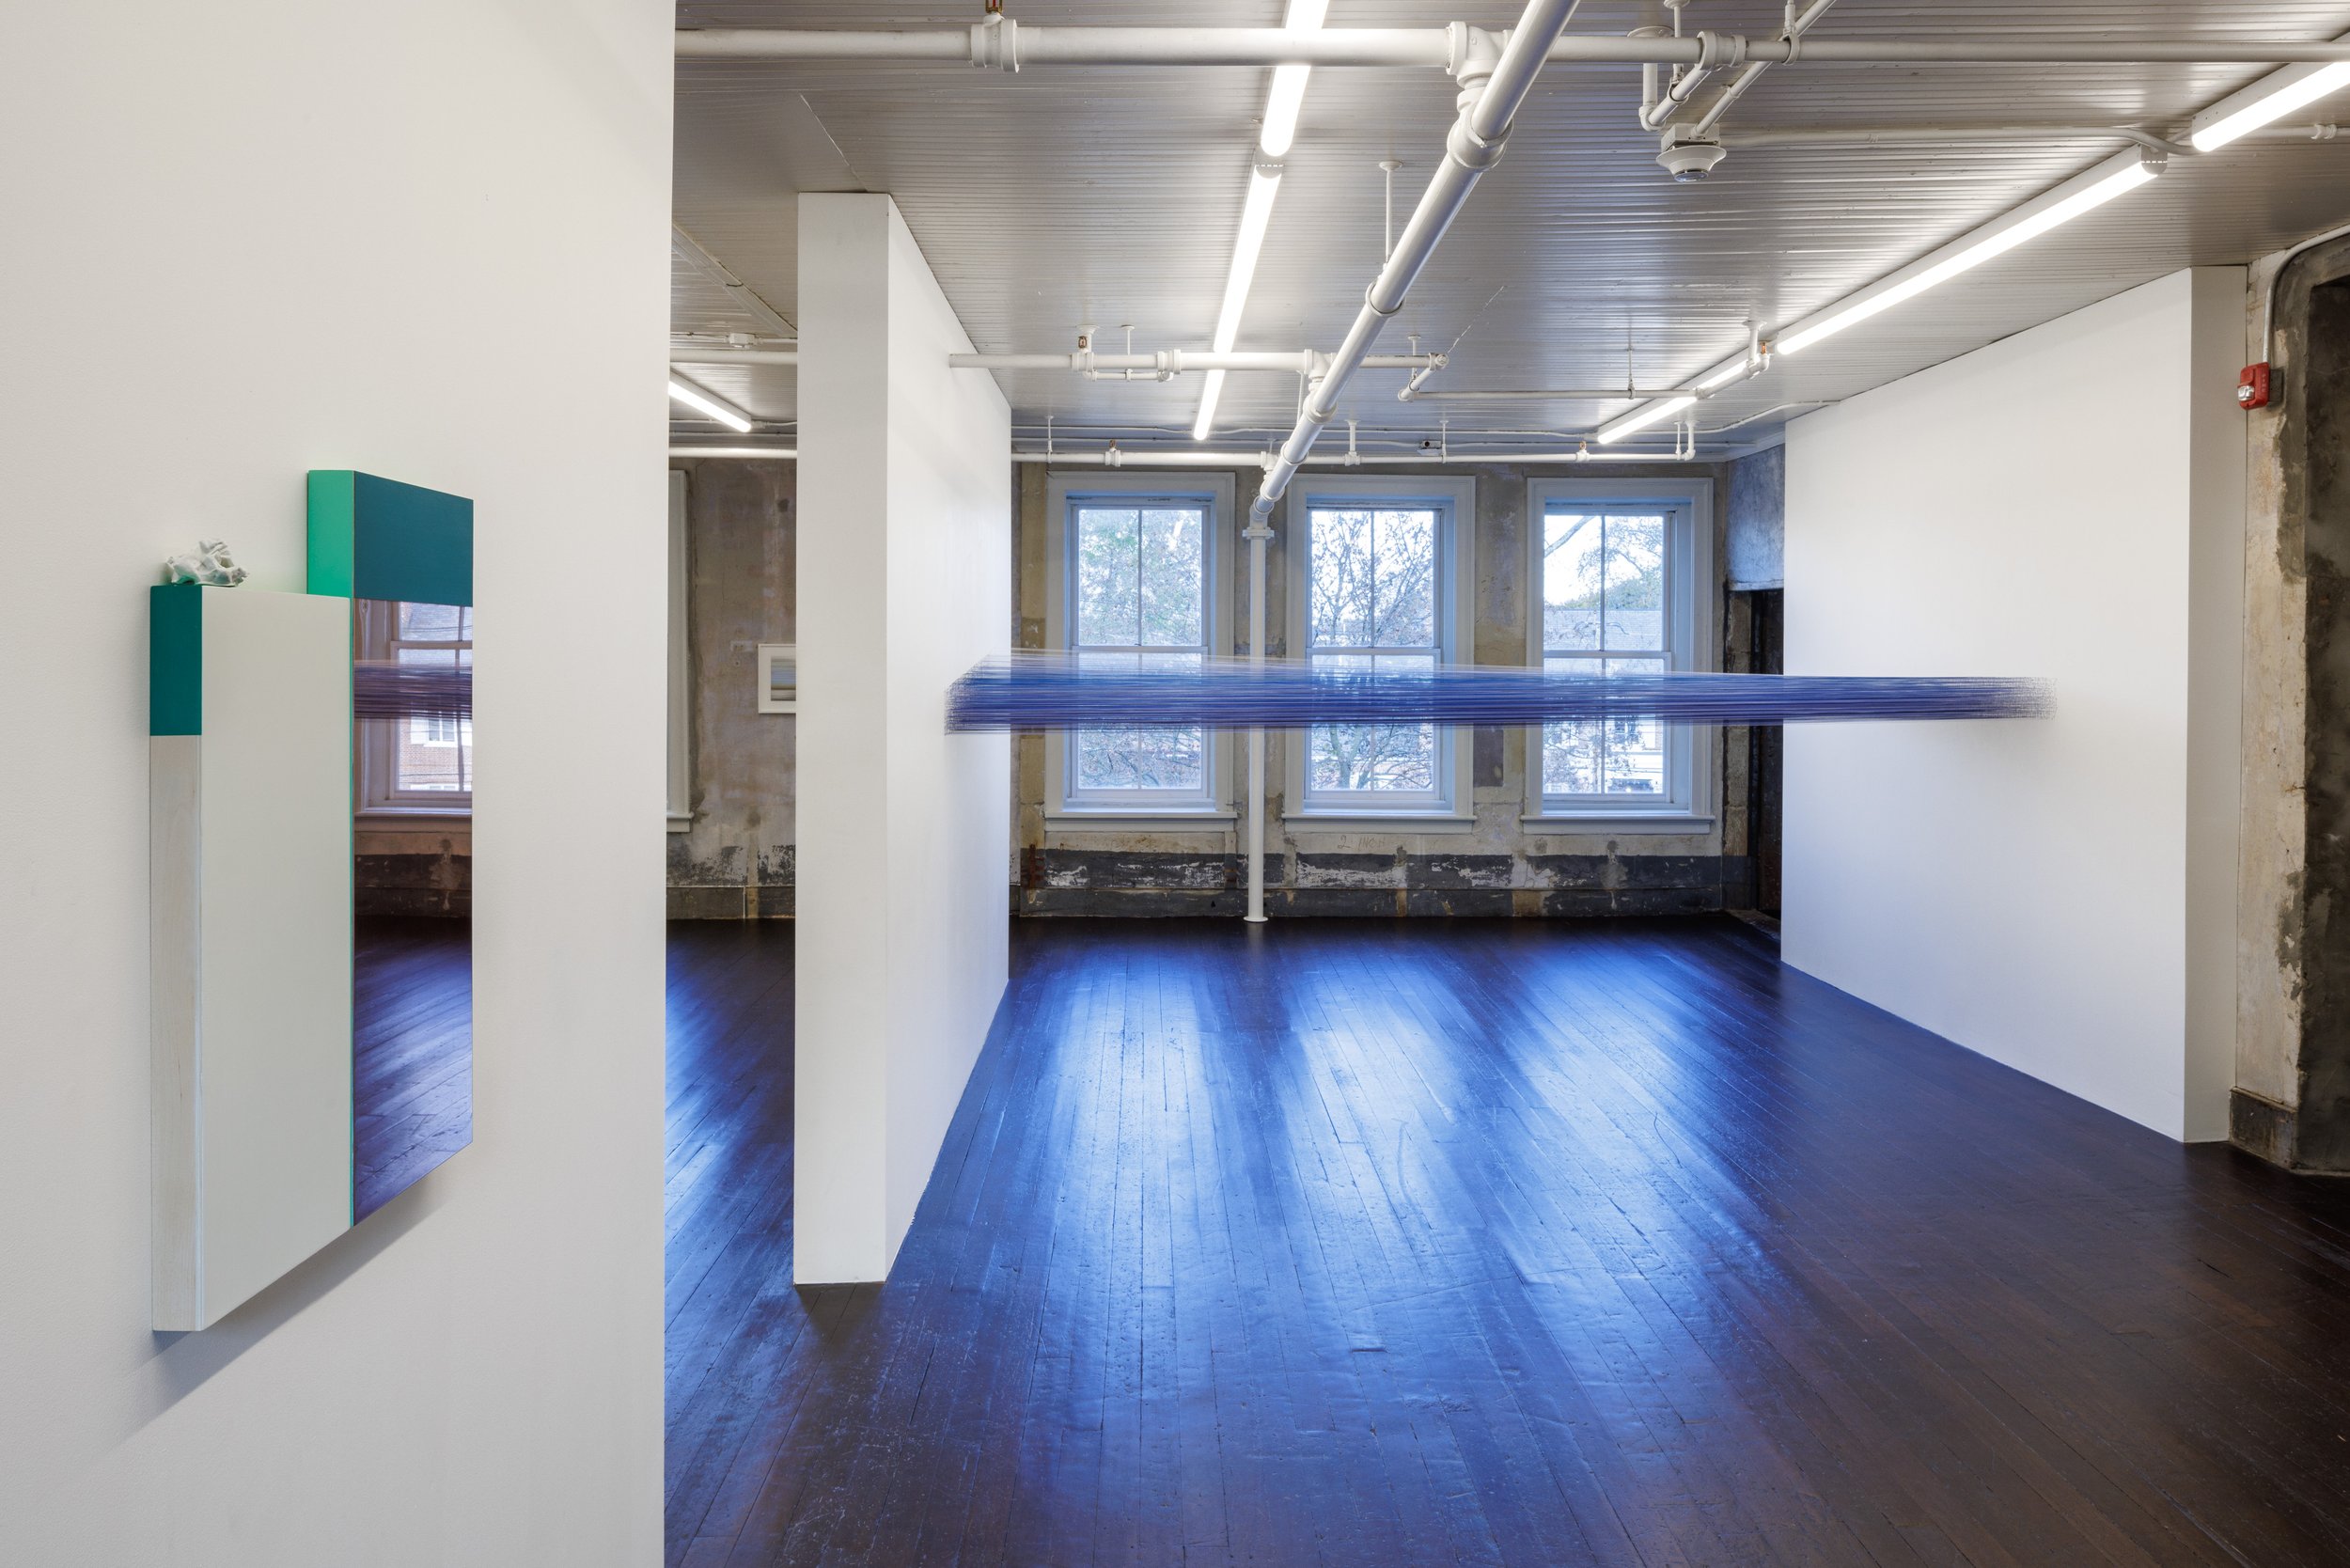  installation view photography by Alon Koppel 